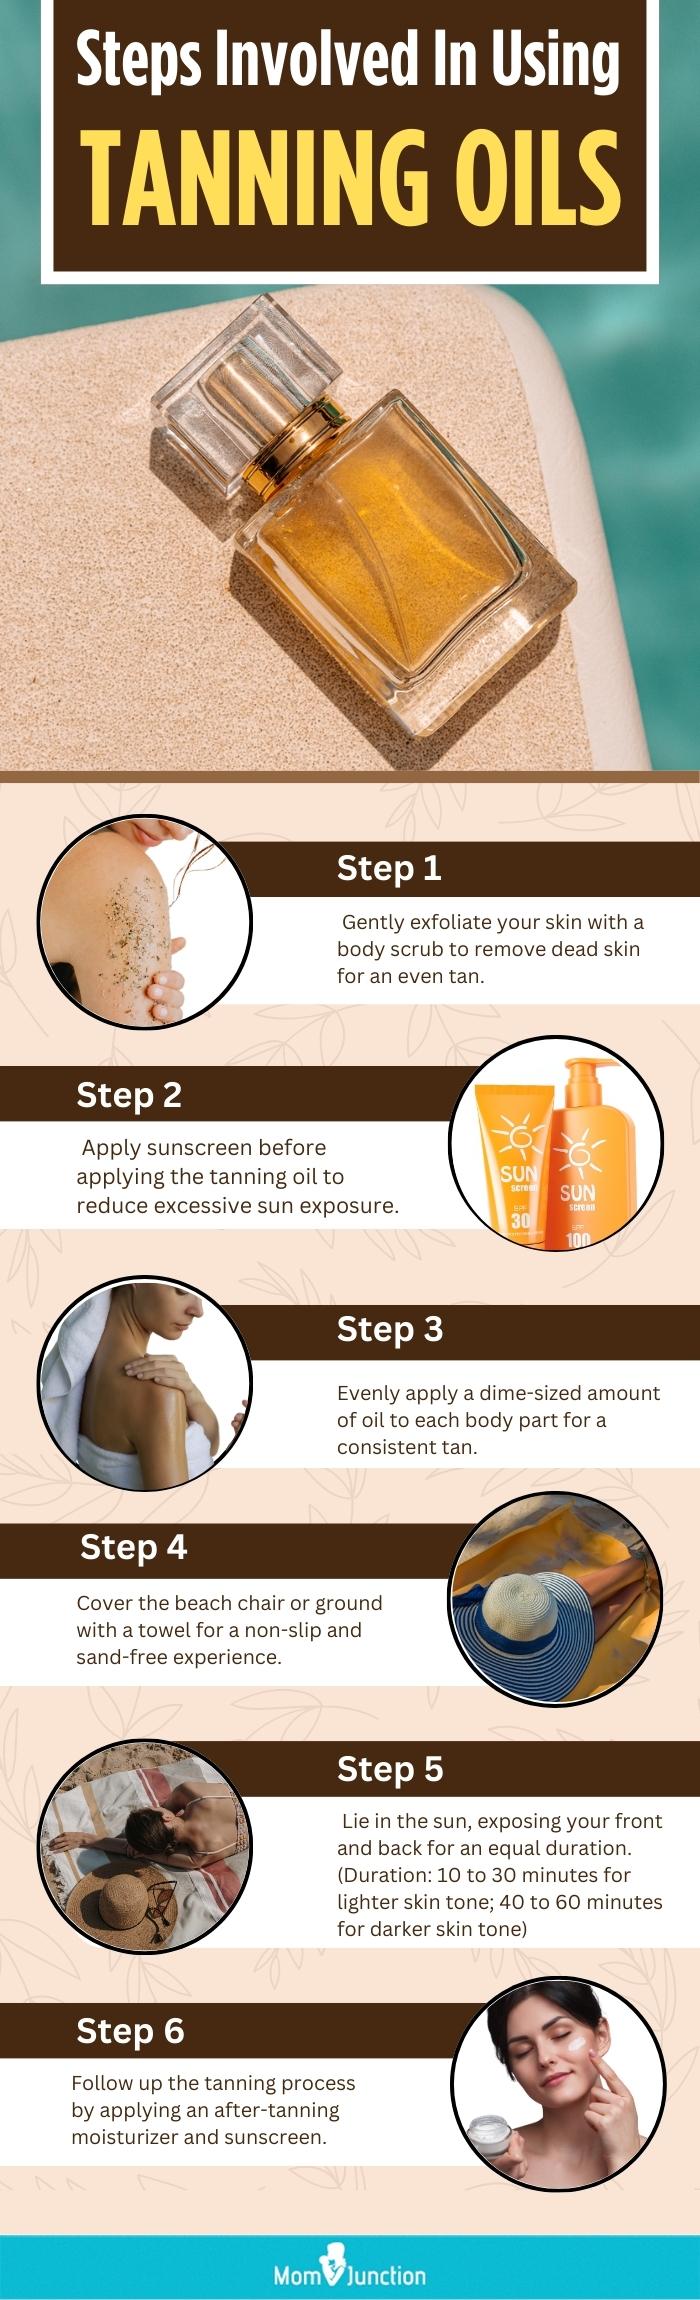 Steps Involved In Using Tanning Oils (infographic)